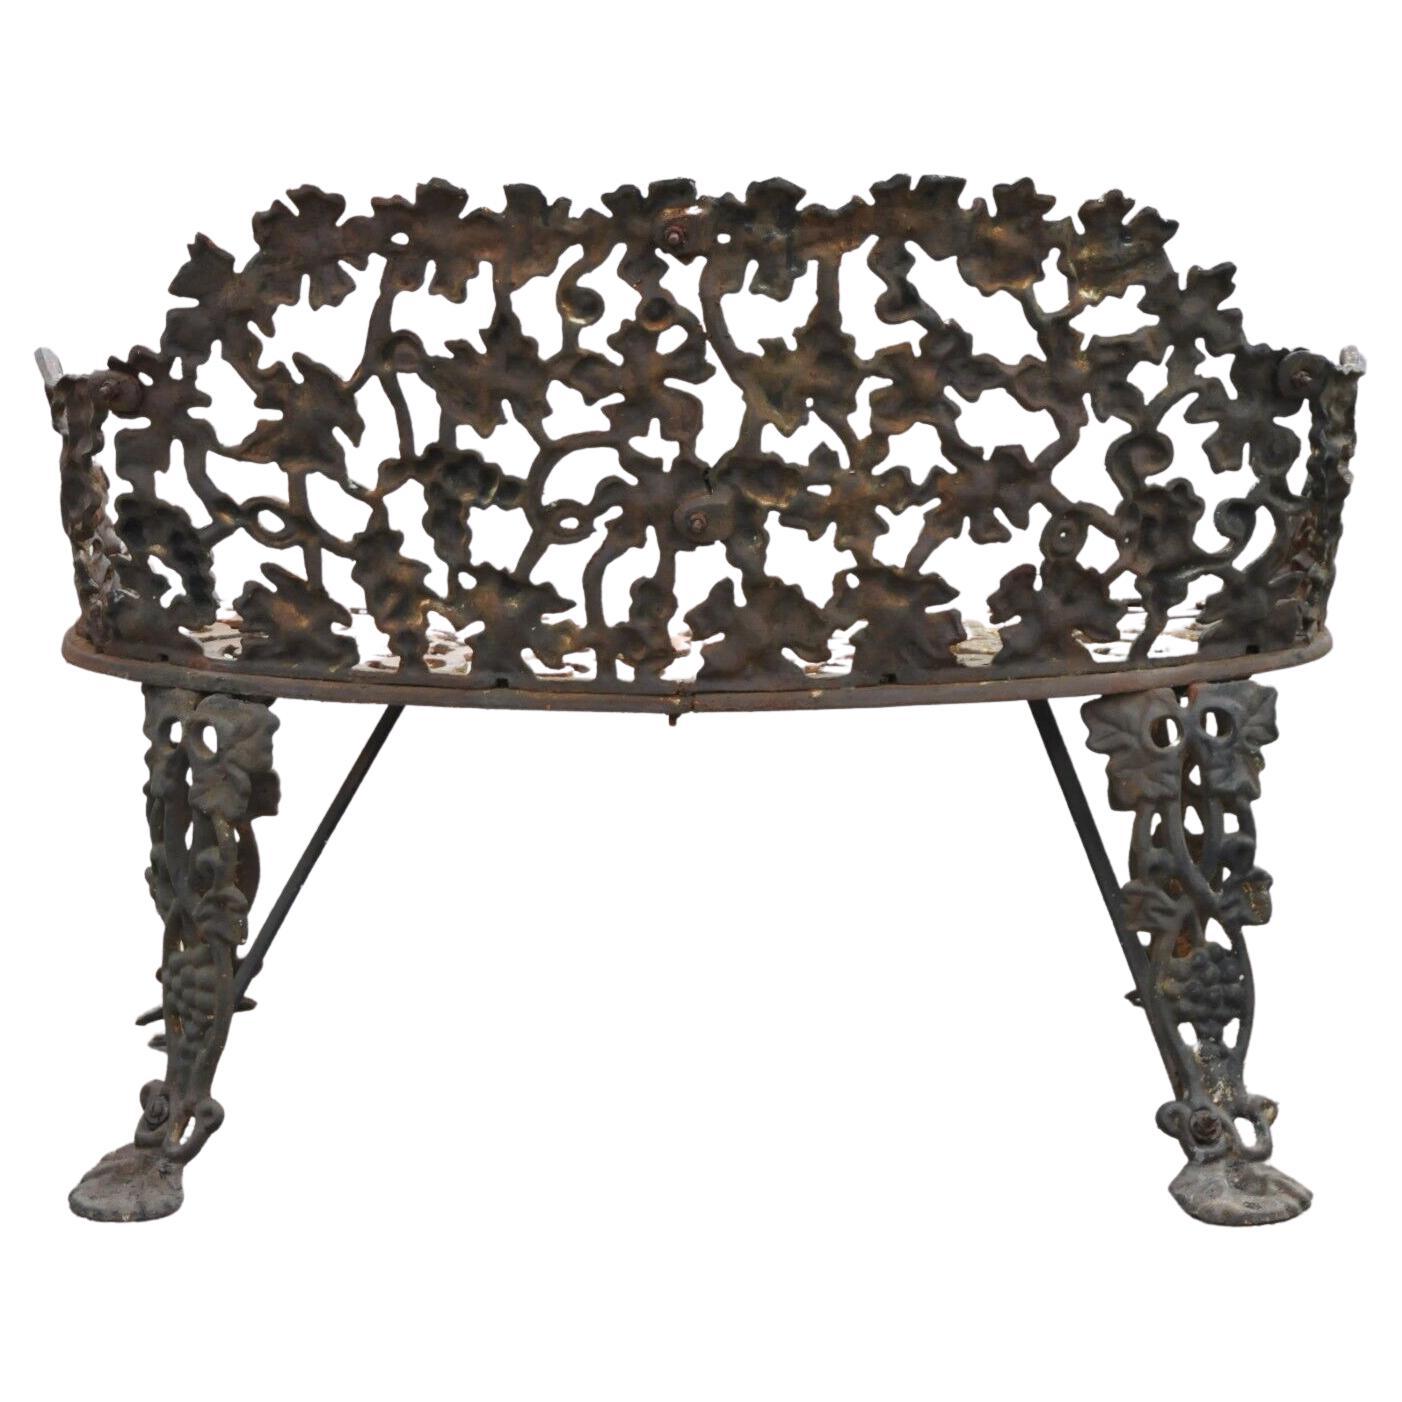 Antique French Victorian grape vine leaf cast iron small garden bench loveseat. Item features cast iron construction, very nice antique item, quality craftsmanship, great style and form. Circa early to mid 20th century.
Measurements: 28.5